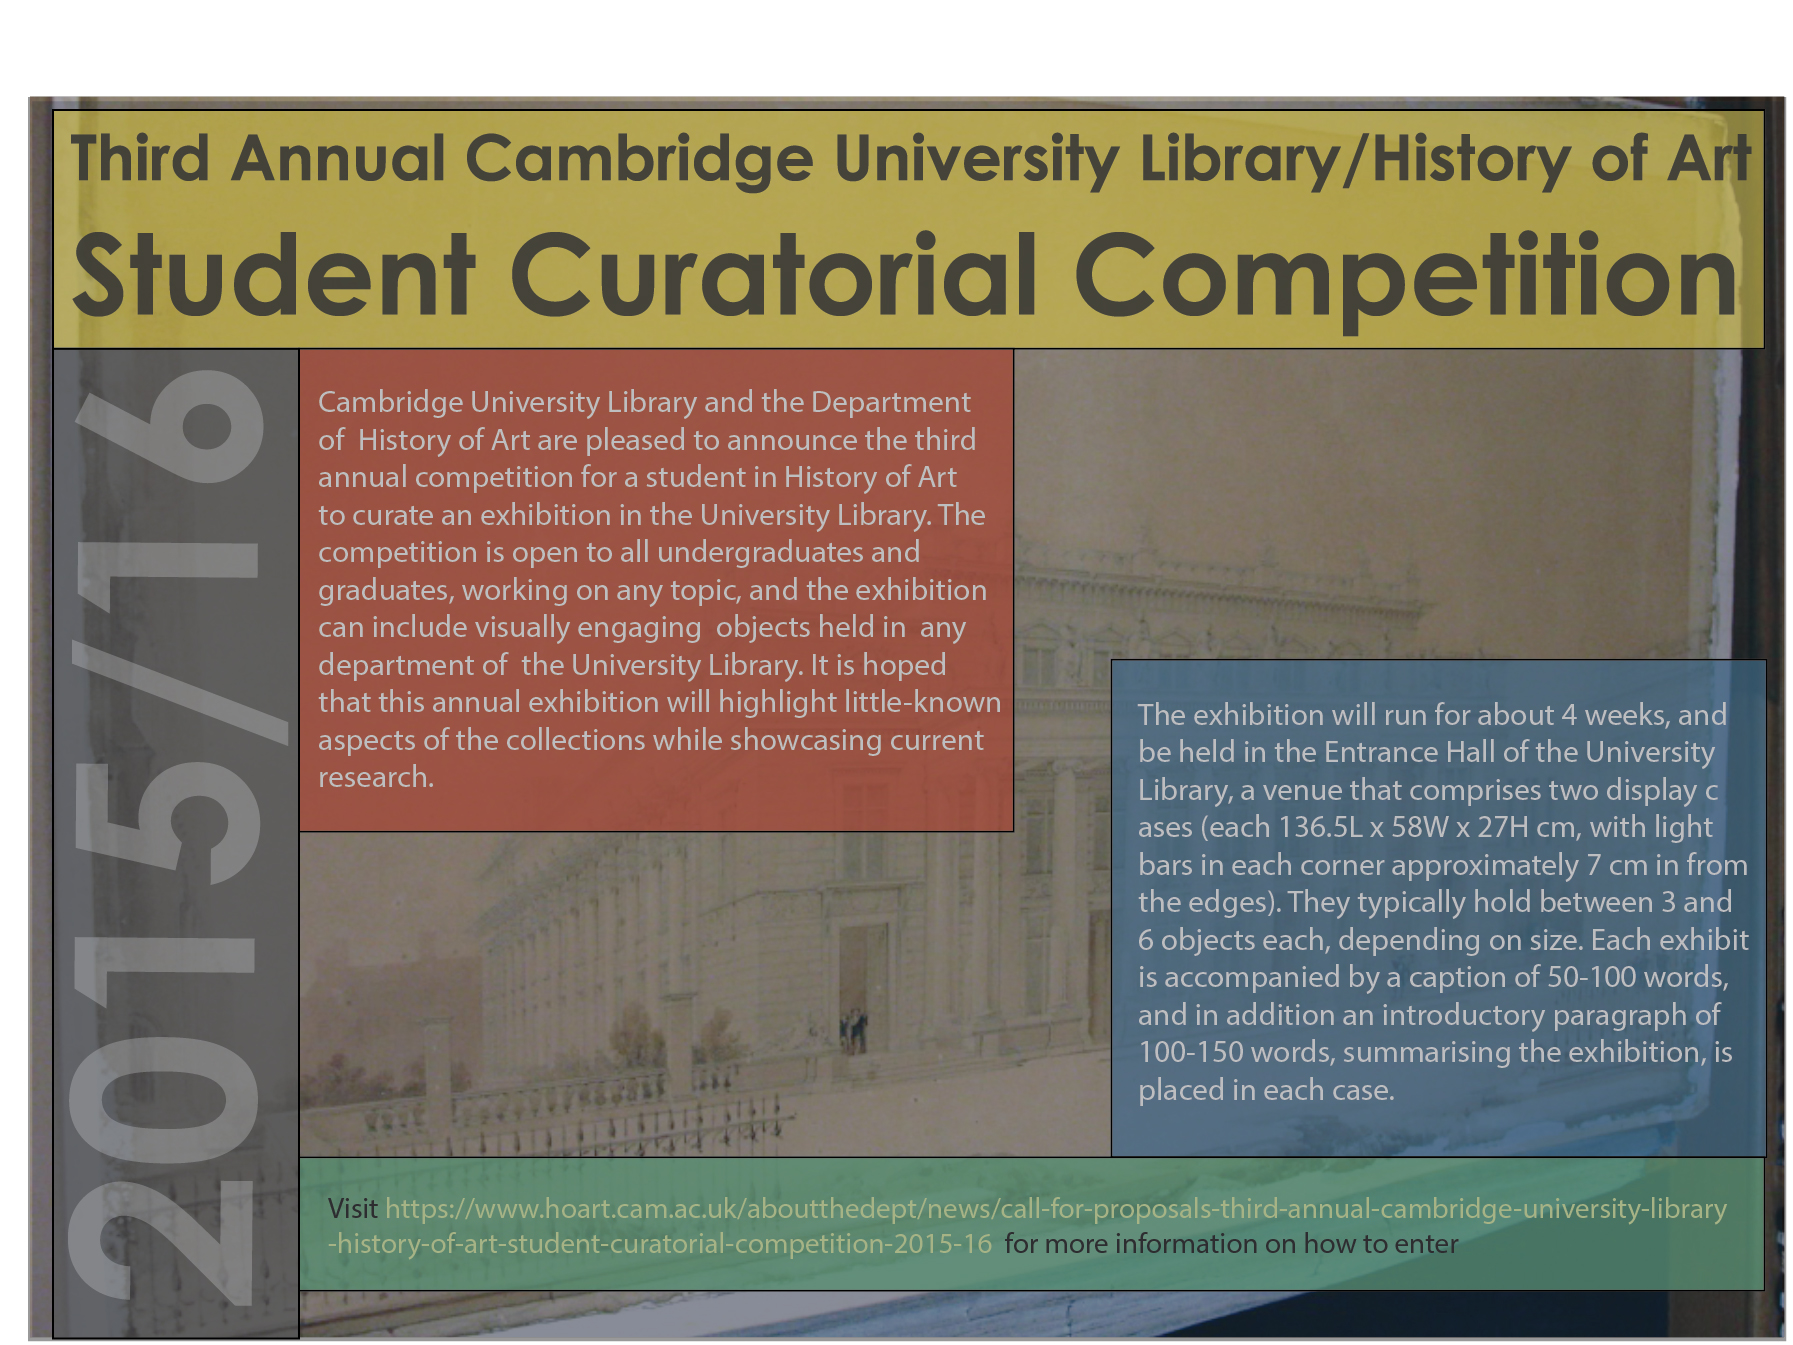 2016 Curatorial Competition Poster